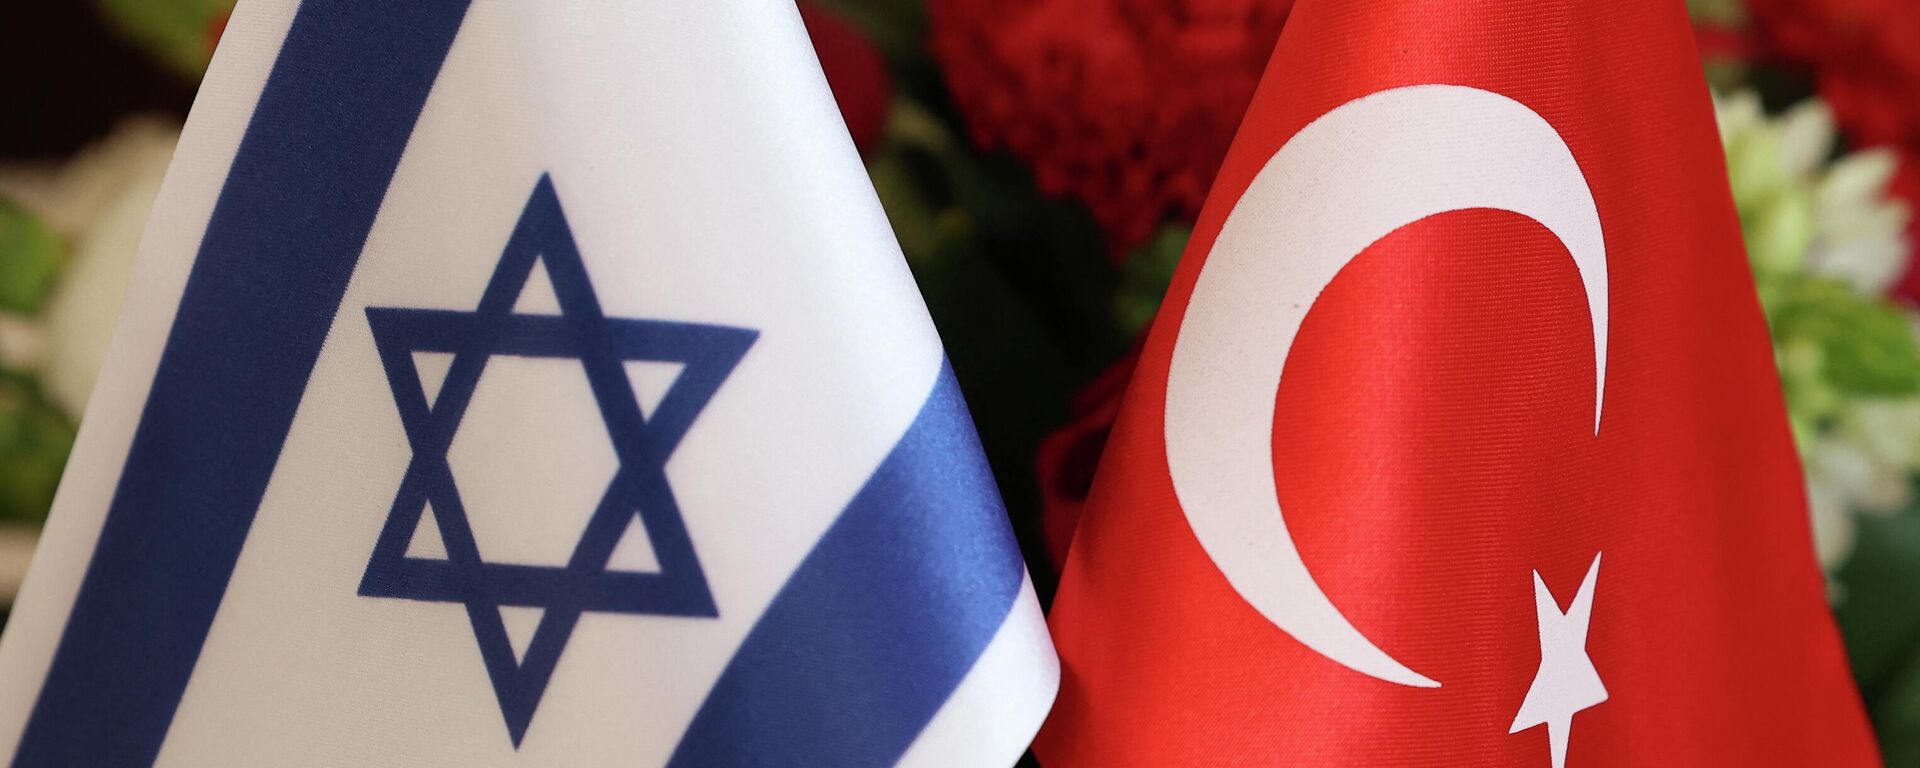 The Turkish (R) and Israeli flags are pictured before a meeting between the Turkish Foreign Minister Mevlut Cavusoglu and Israeli businessmen, in the coastral city of Tel Aviv, on May 25, 2022. - Cavusoglu is on a visit to Israel and the occupied-West Bank to meet with Israeli and Palestinian officials. (Photo by JACK GUEZ / AFP) - Sputnik International, 1920, 17.08.2022